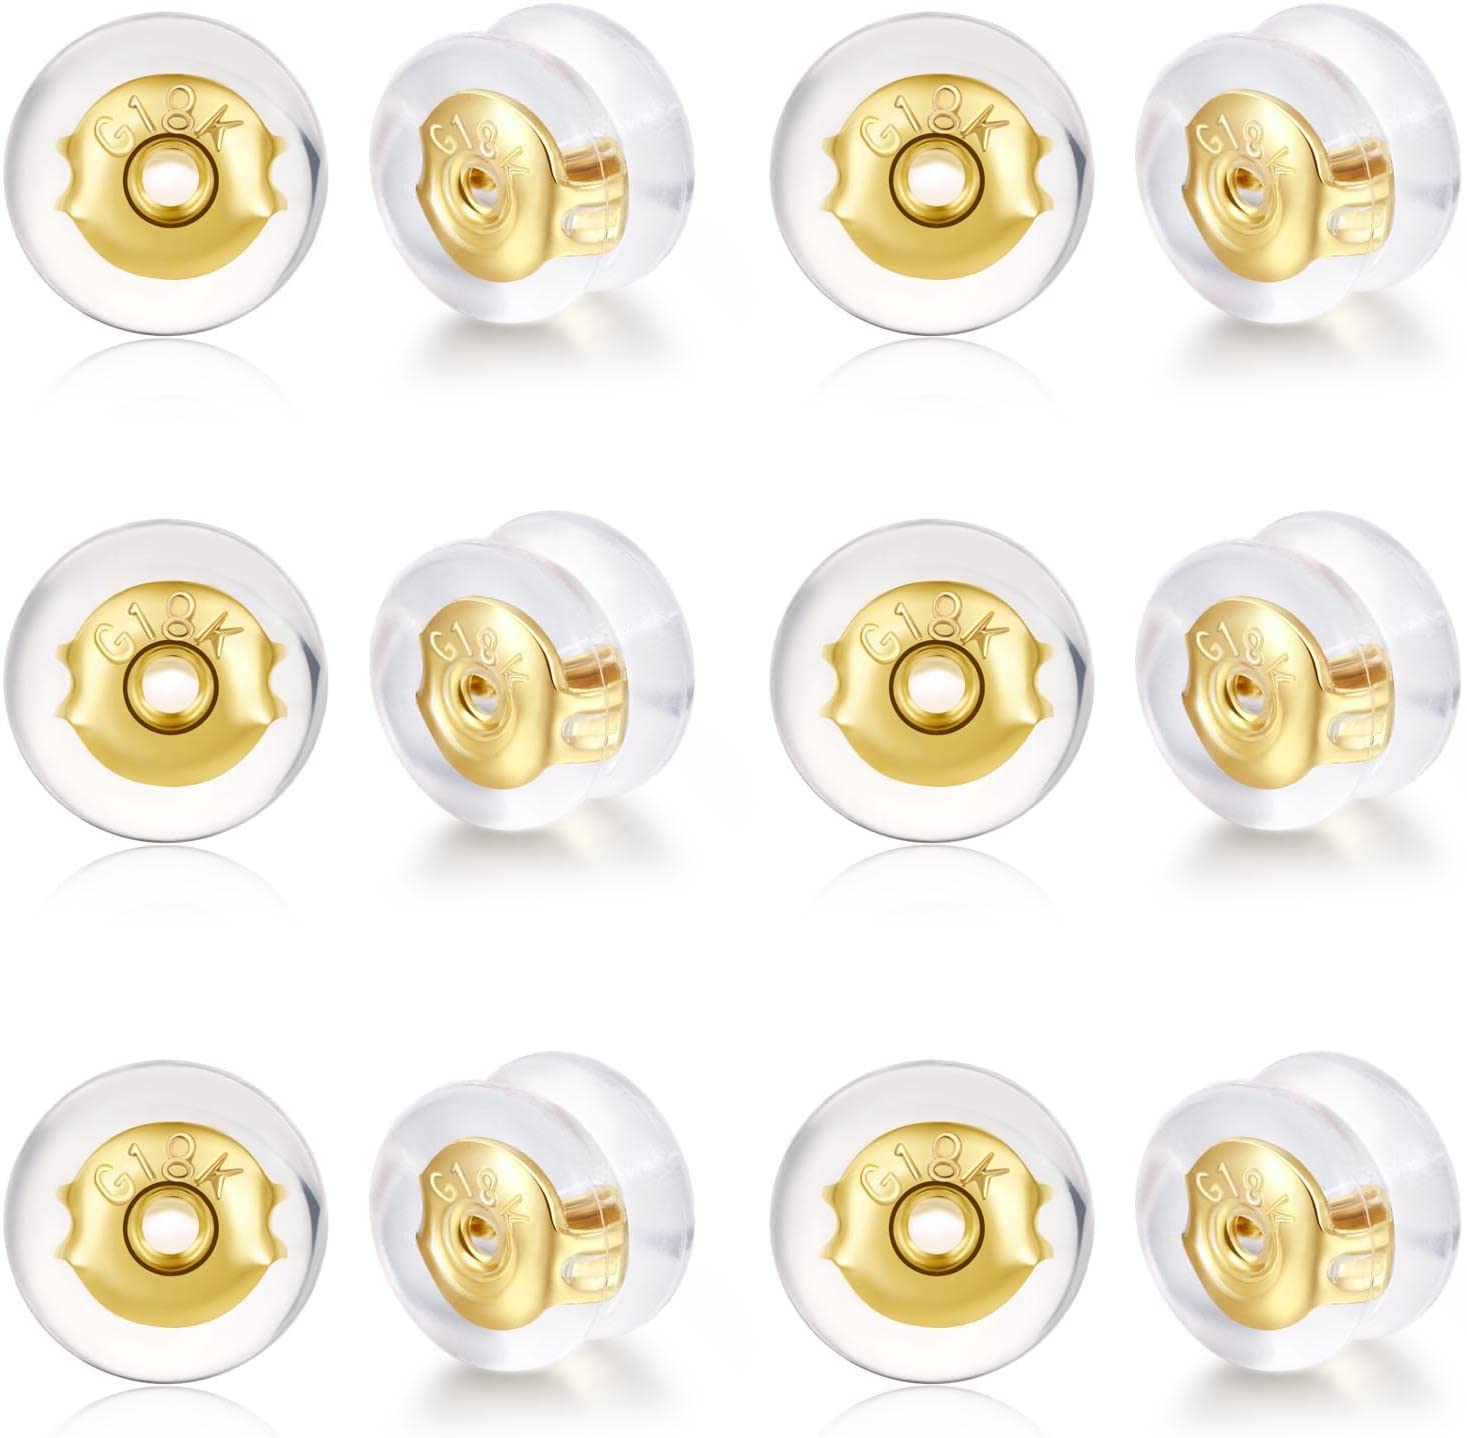 Butterfly Earring Backs, 925 Stering Silver Earring Backs Gold Plated  Earring Backs Replacements Hypoallergenic Secure Earring Backs for Studs  Posts (8 Pair) 